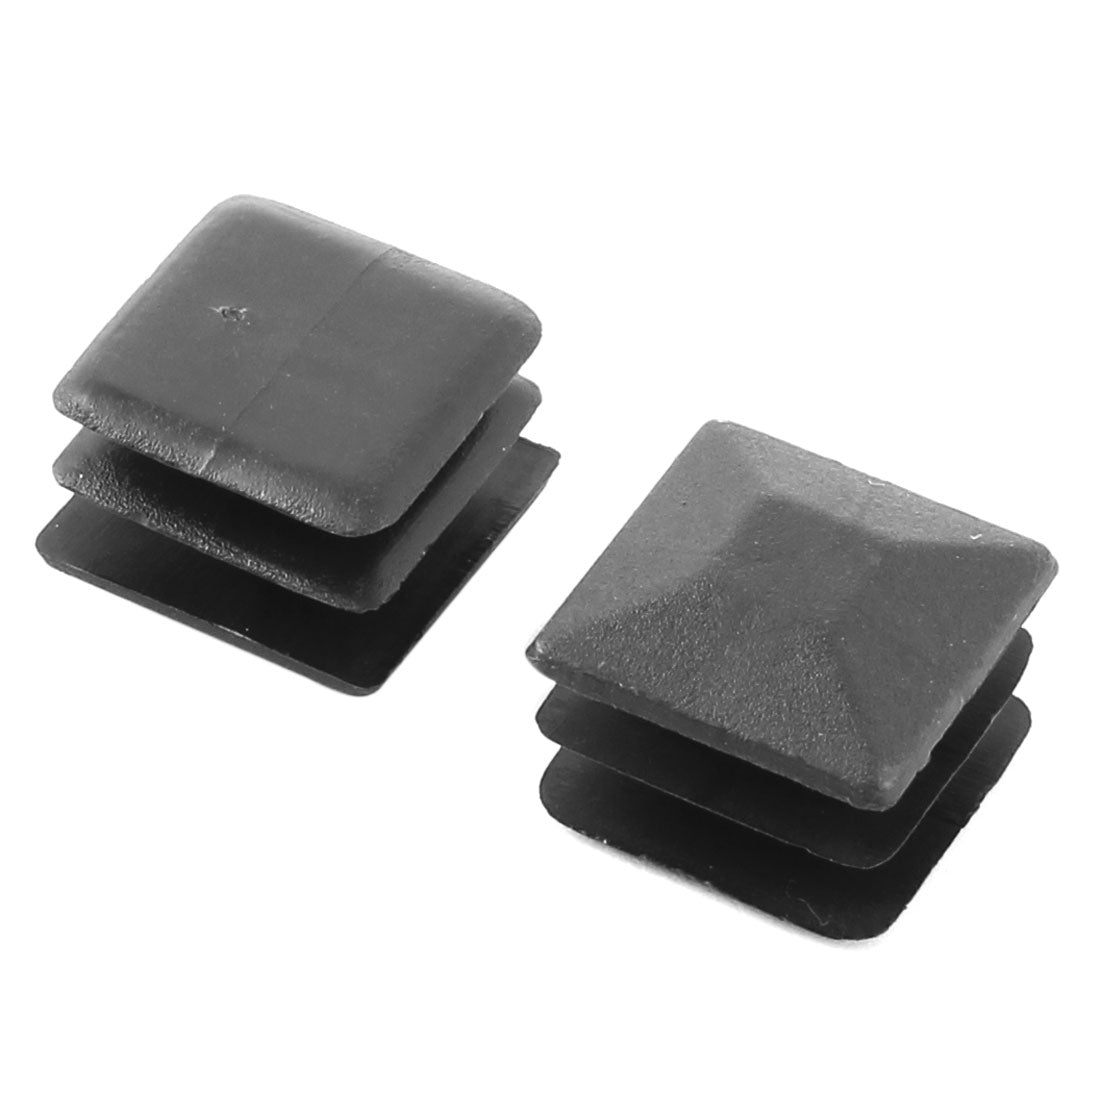 uxcell Uxcell Plastic Square Furniture Chair Legs Tube Insert Black 20mm x 20mm 20 Pcs